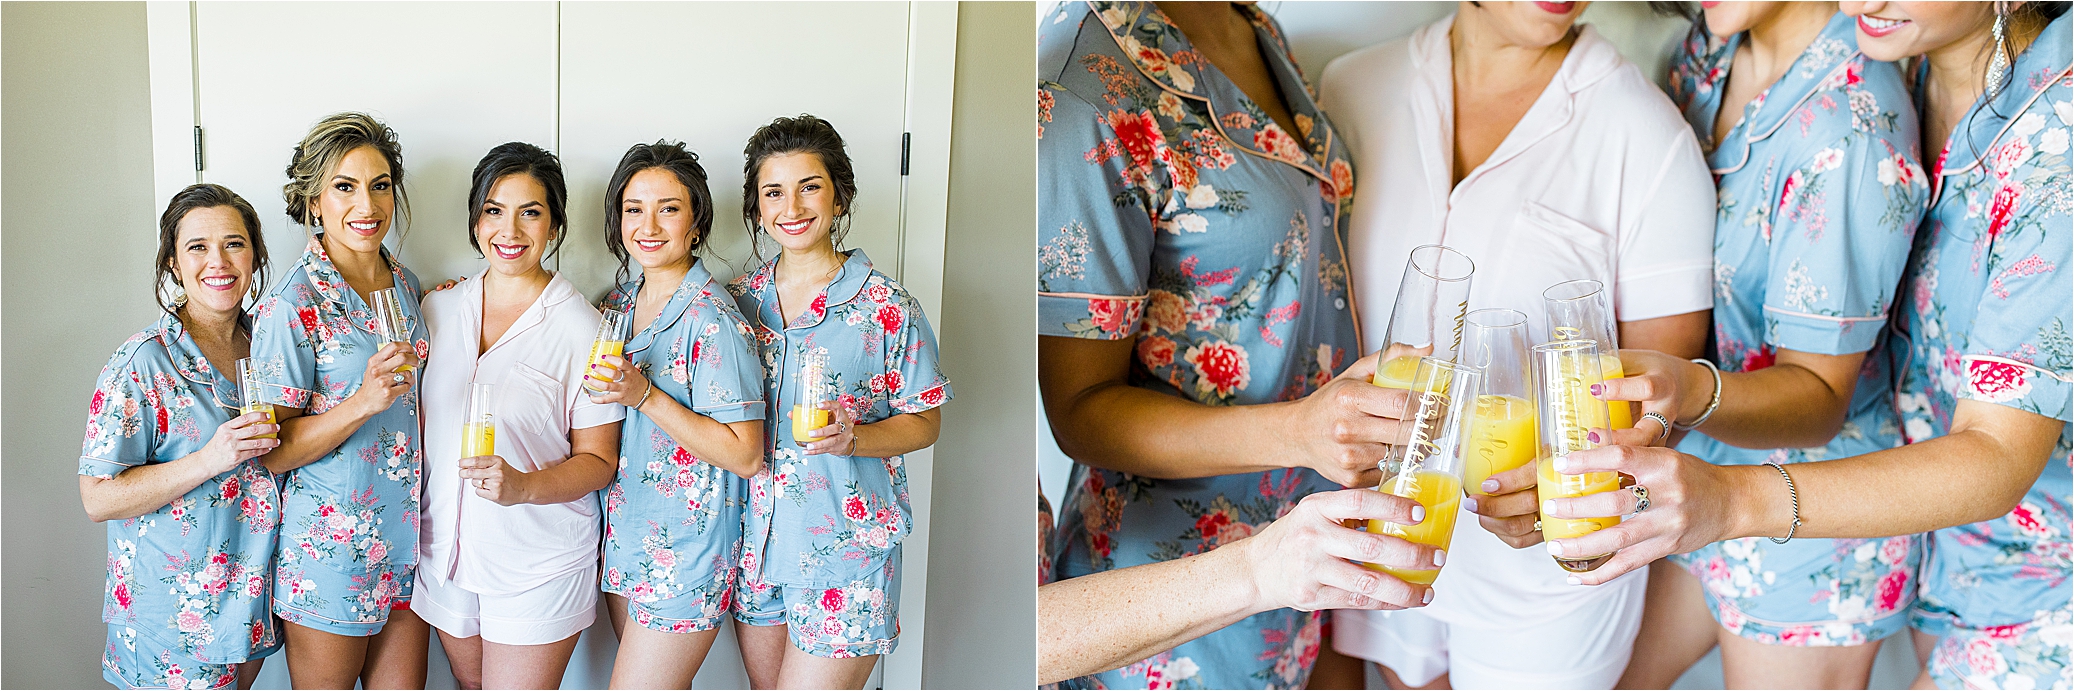 Bridesmaids and the bride in their pjs with mimosas in the bridal suite at Paniolo Ranch in Boerne, Texas